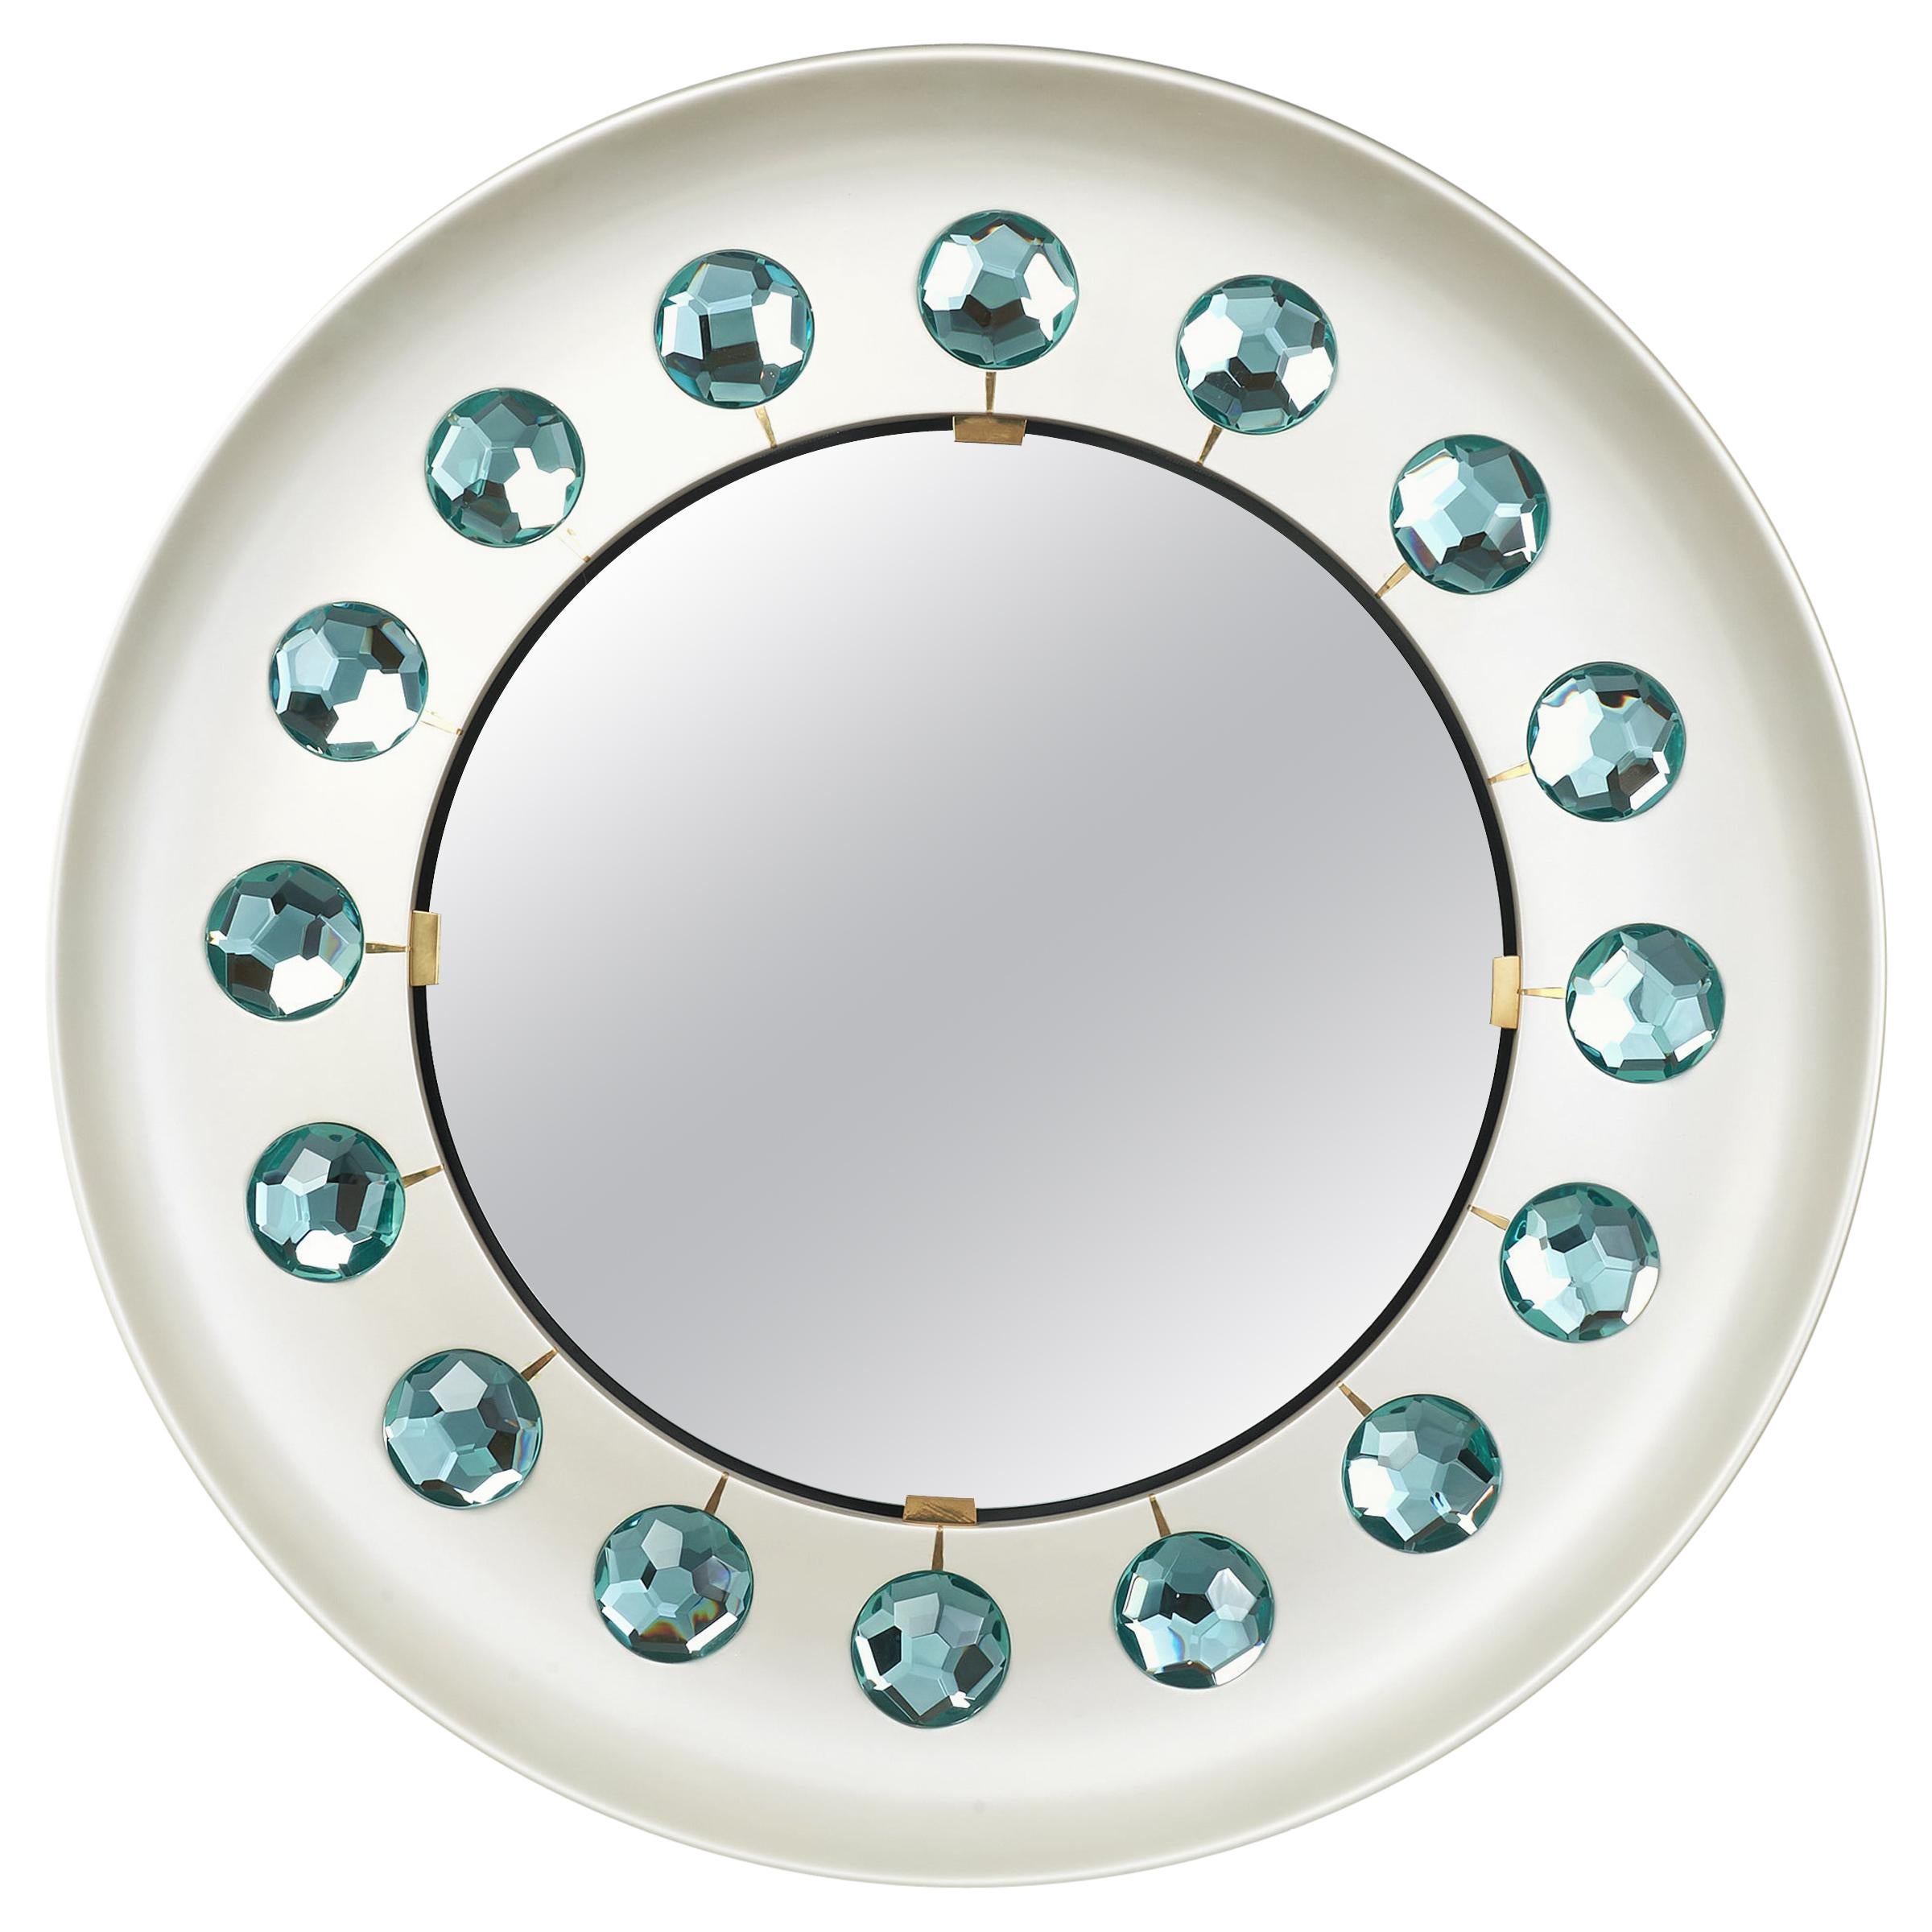 Ghiro Studio Mirror with Faceted Diamond Cut Glass, Italy, 2019